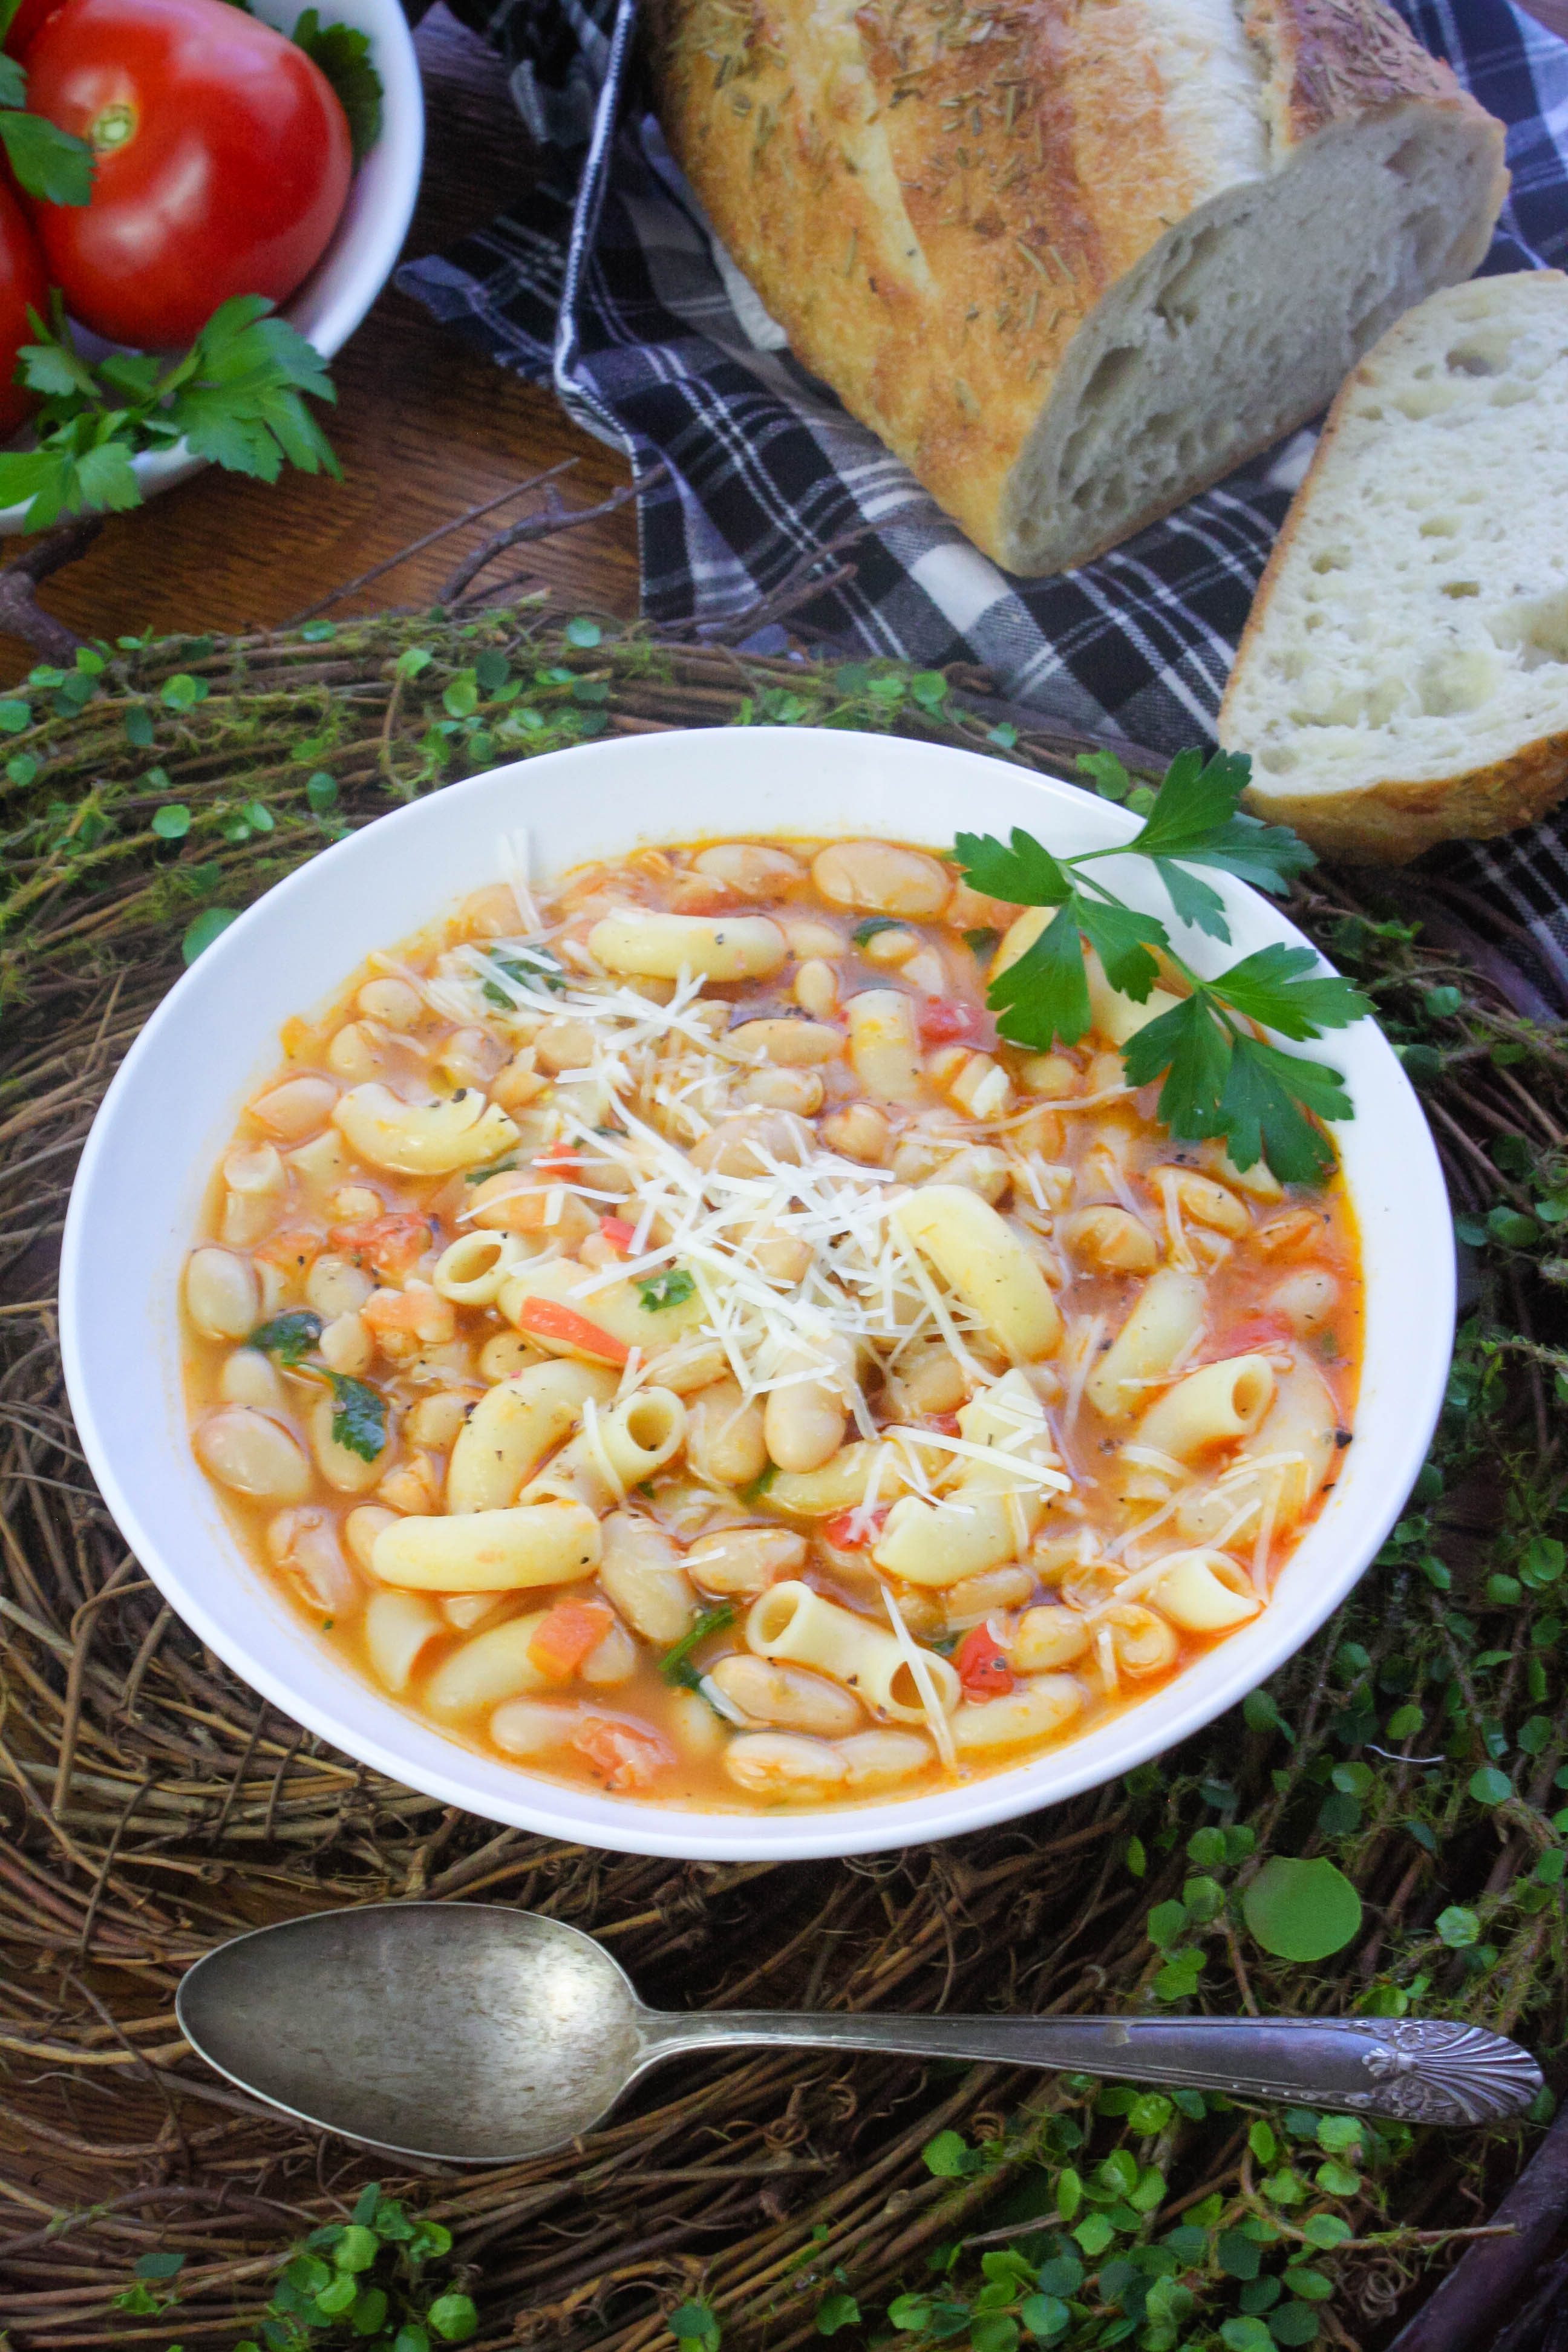 Pasta e Fagioli (Pasta and Beans) is an Italian dish everyone will love. It's so easy to make and enjoy Pasta e Fagioli (Pasta and Beans)!